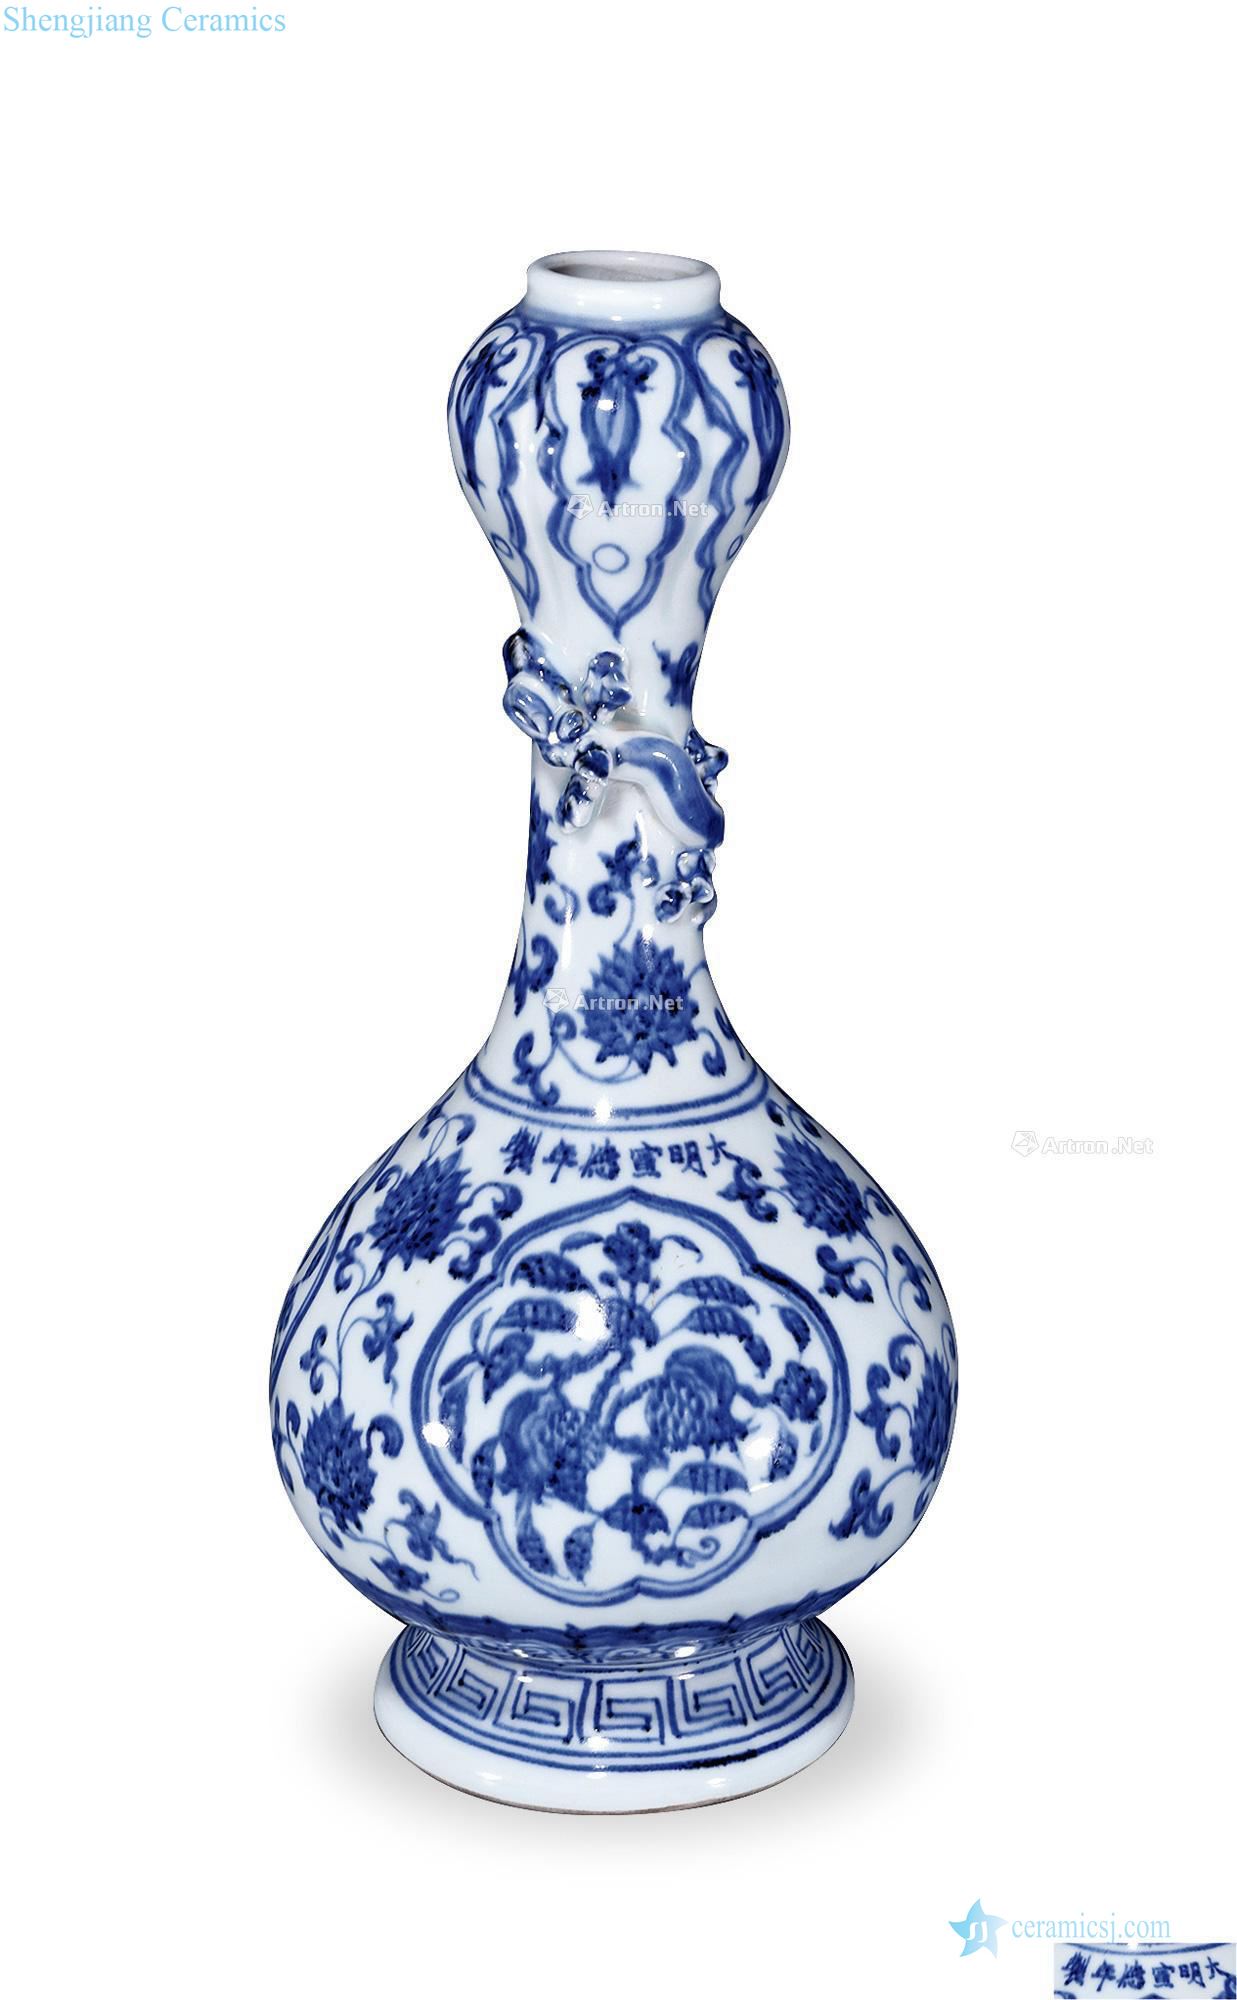 In the Ming dynasty Blue and white three fruit grain of garlic bottle